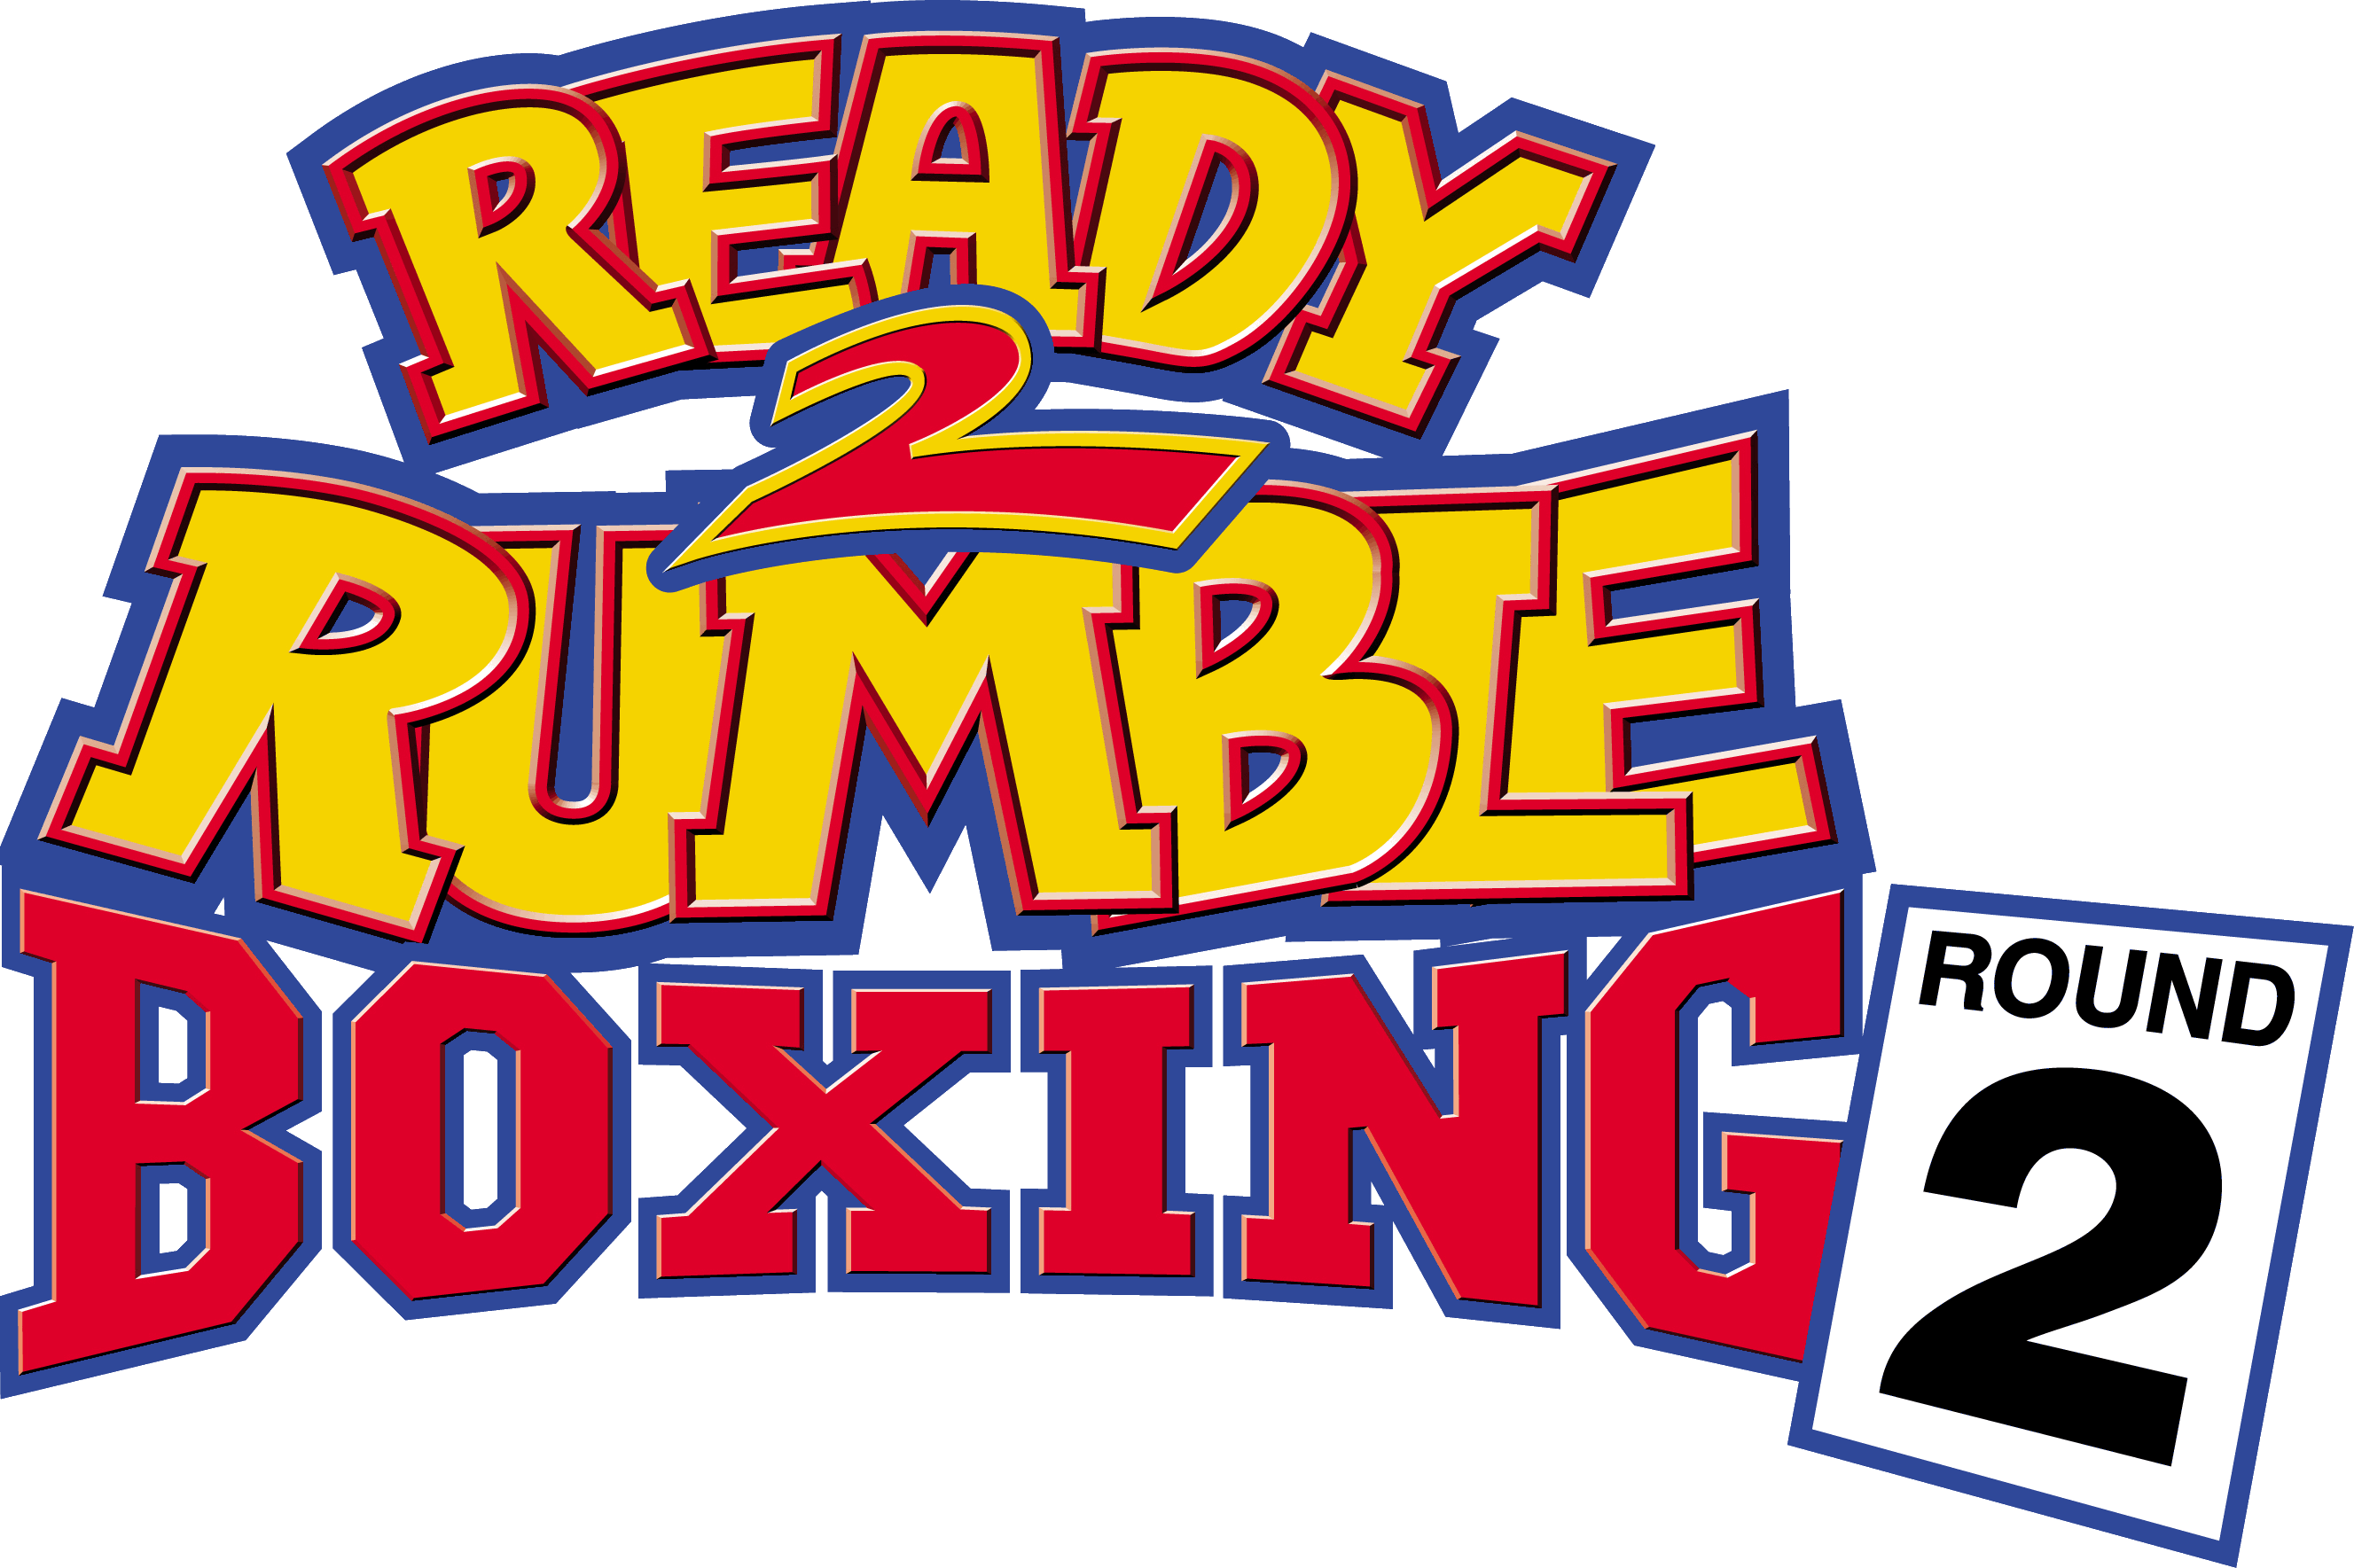 Round 2 2 live. Ready 2 Rumble Boxing: Round 2 ps2. Ready 2 Rumble Boxing. Ready 2 Rumble Boxing ps1. Ready 2 Rumble Boxing Round 2 ps1 русская psxplanet.